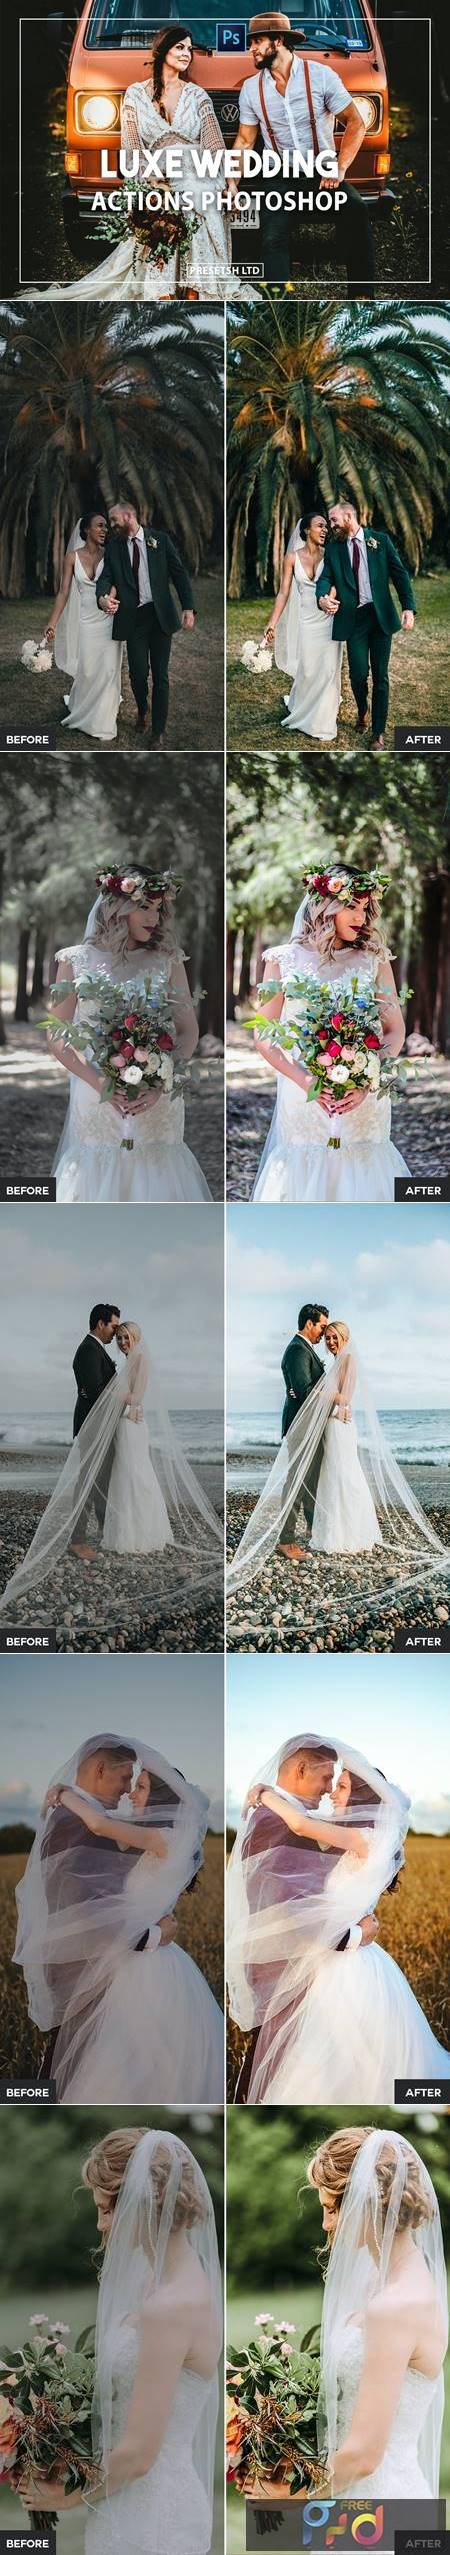 Luxe Weddings Photoshop Actions ZQNN89K 1